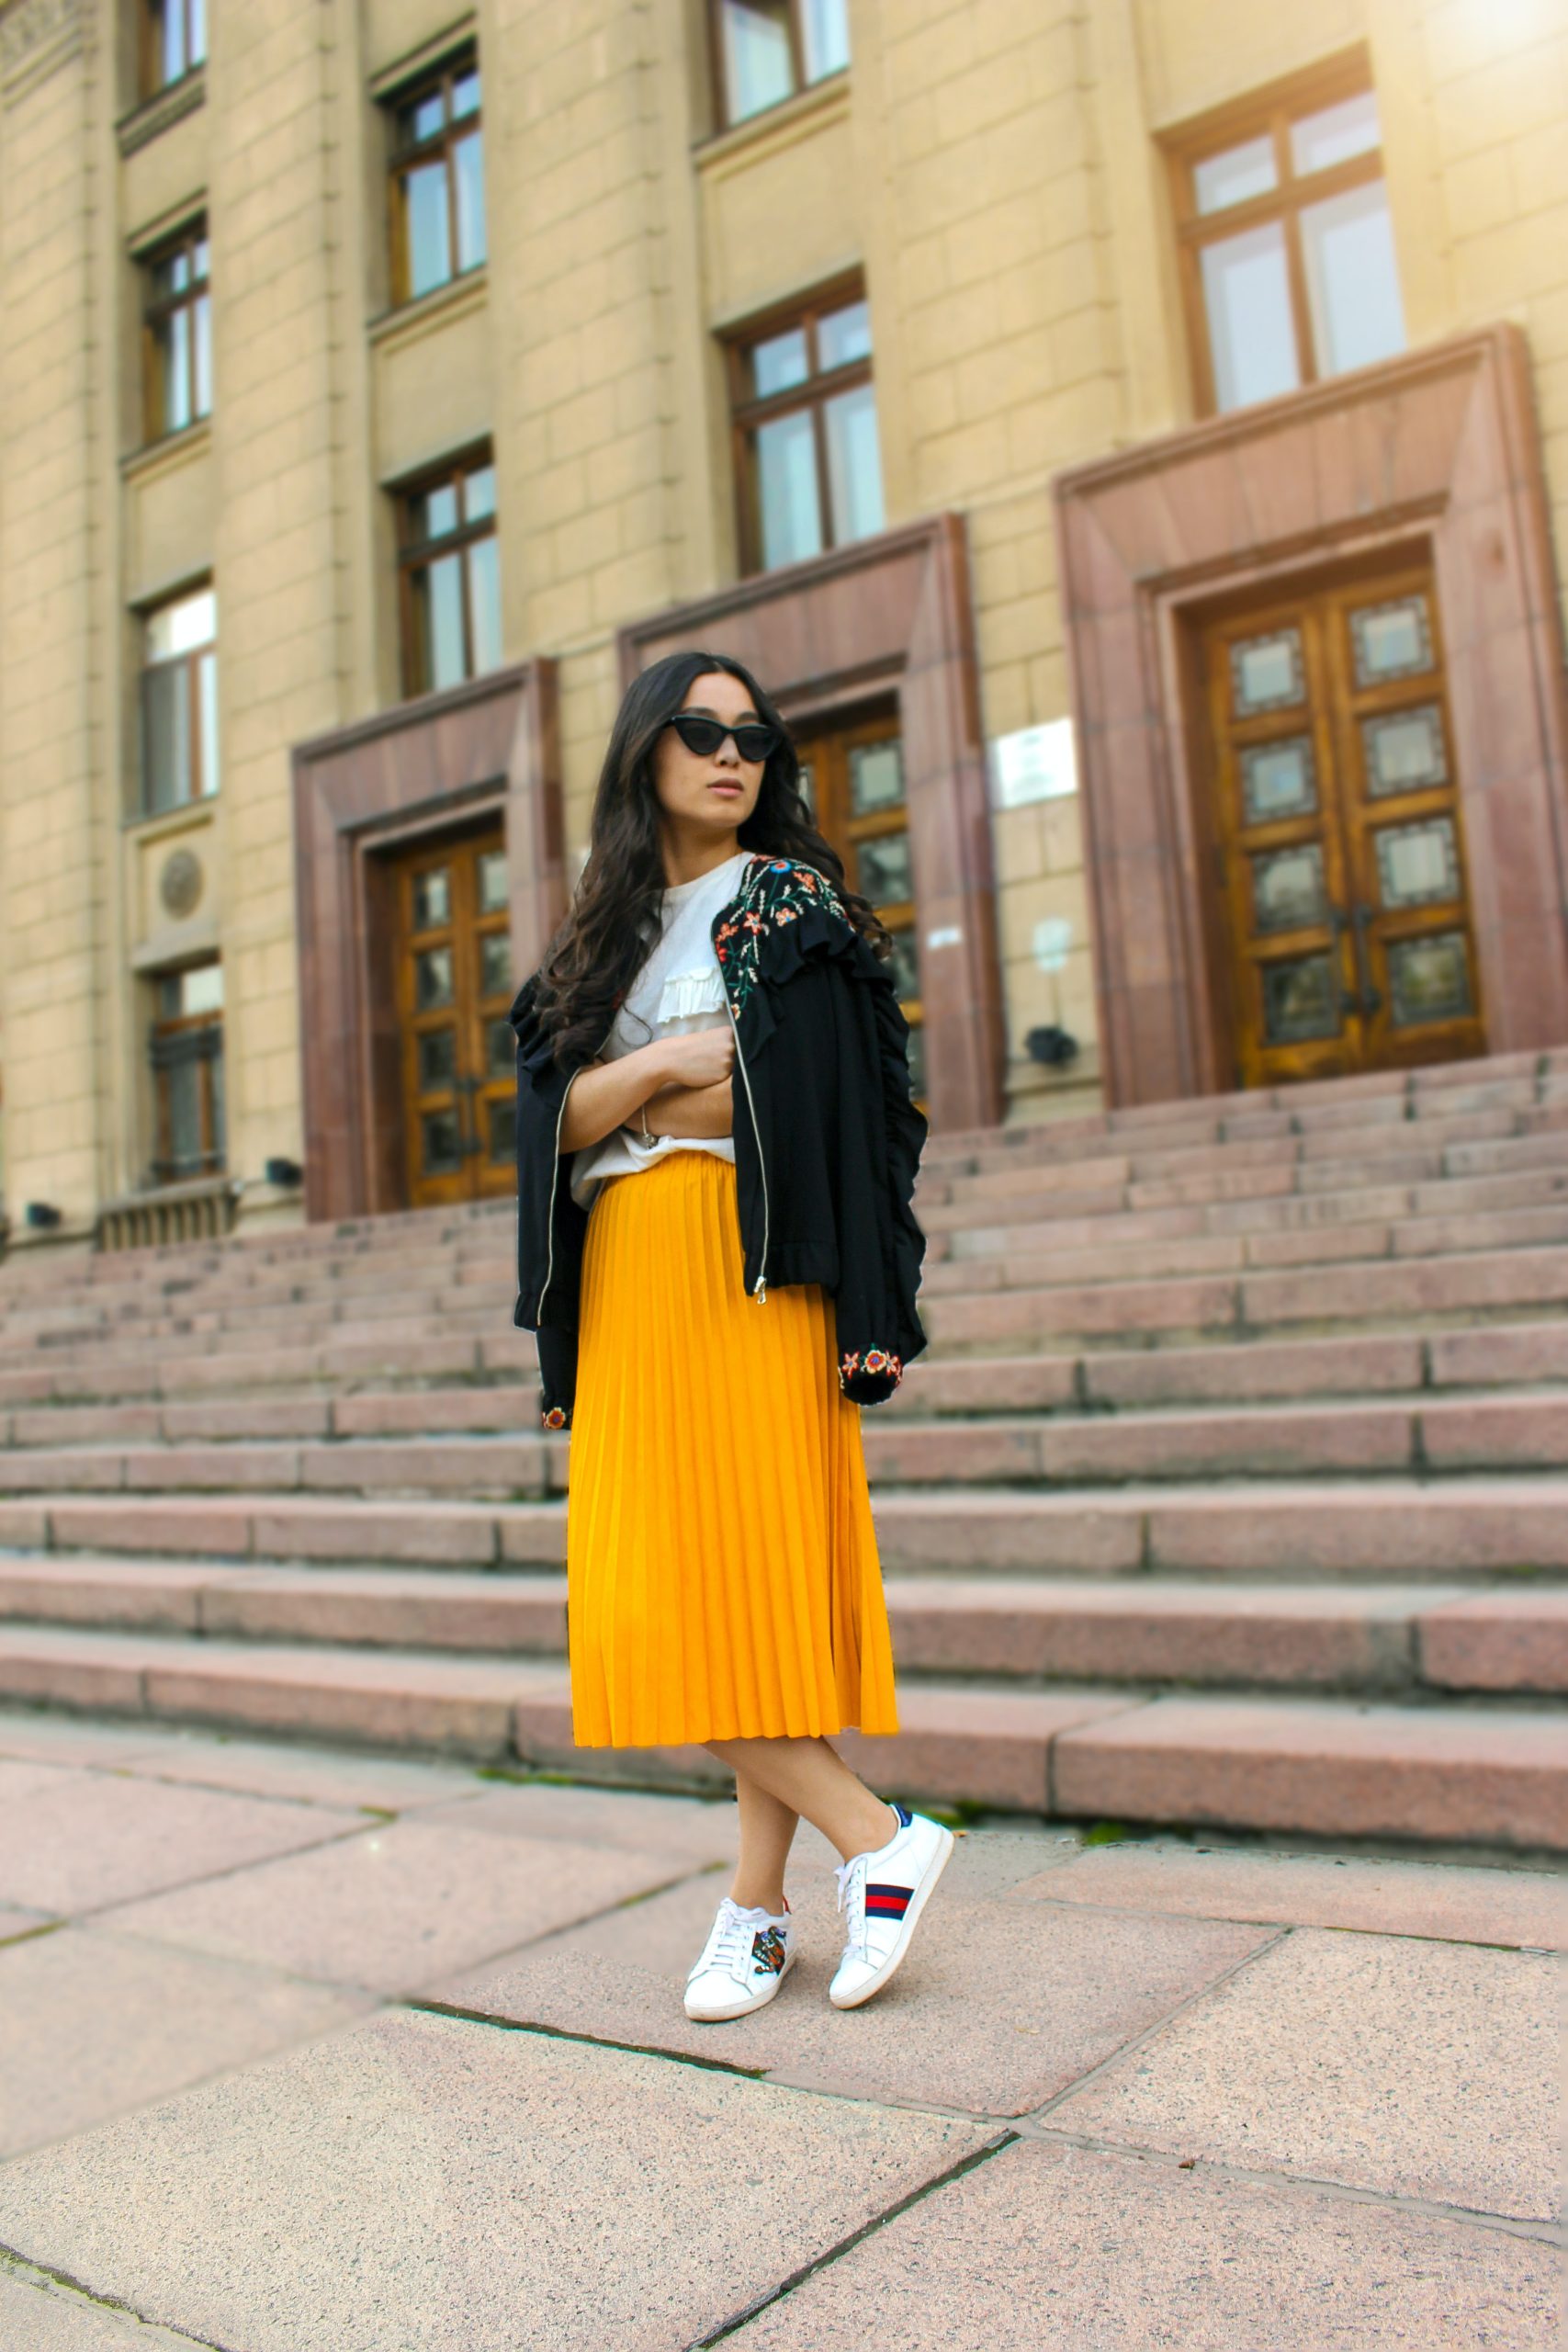 Model in Jacket and yellow froque